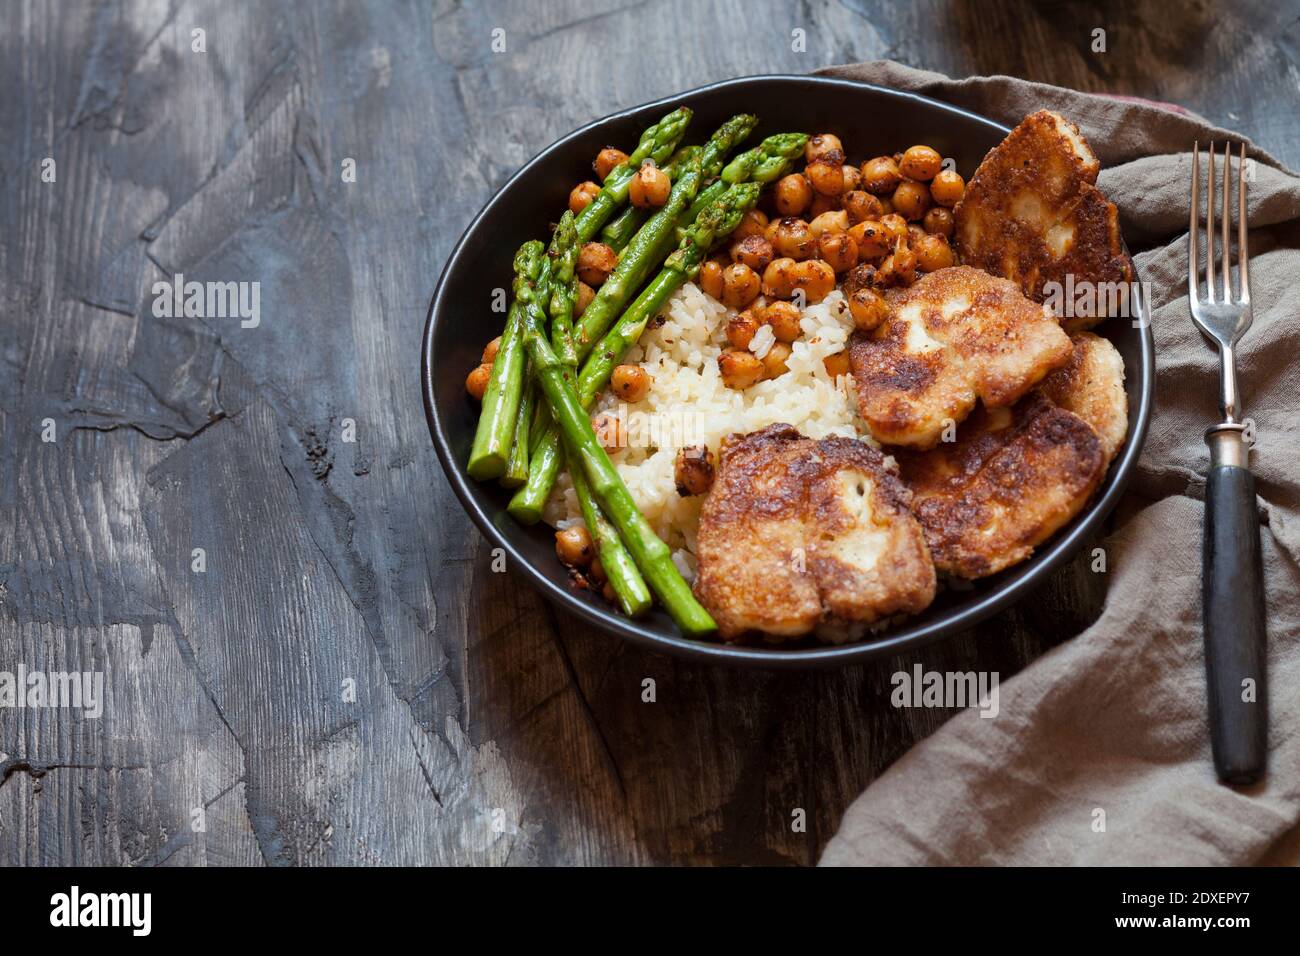 Bowl of rice with chick-peas, asparagus stalks and fried halloumi cheese Stock Photo